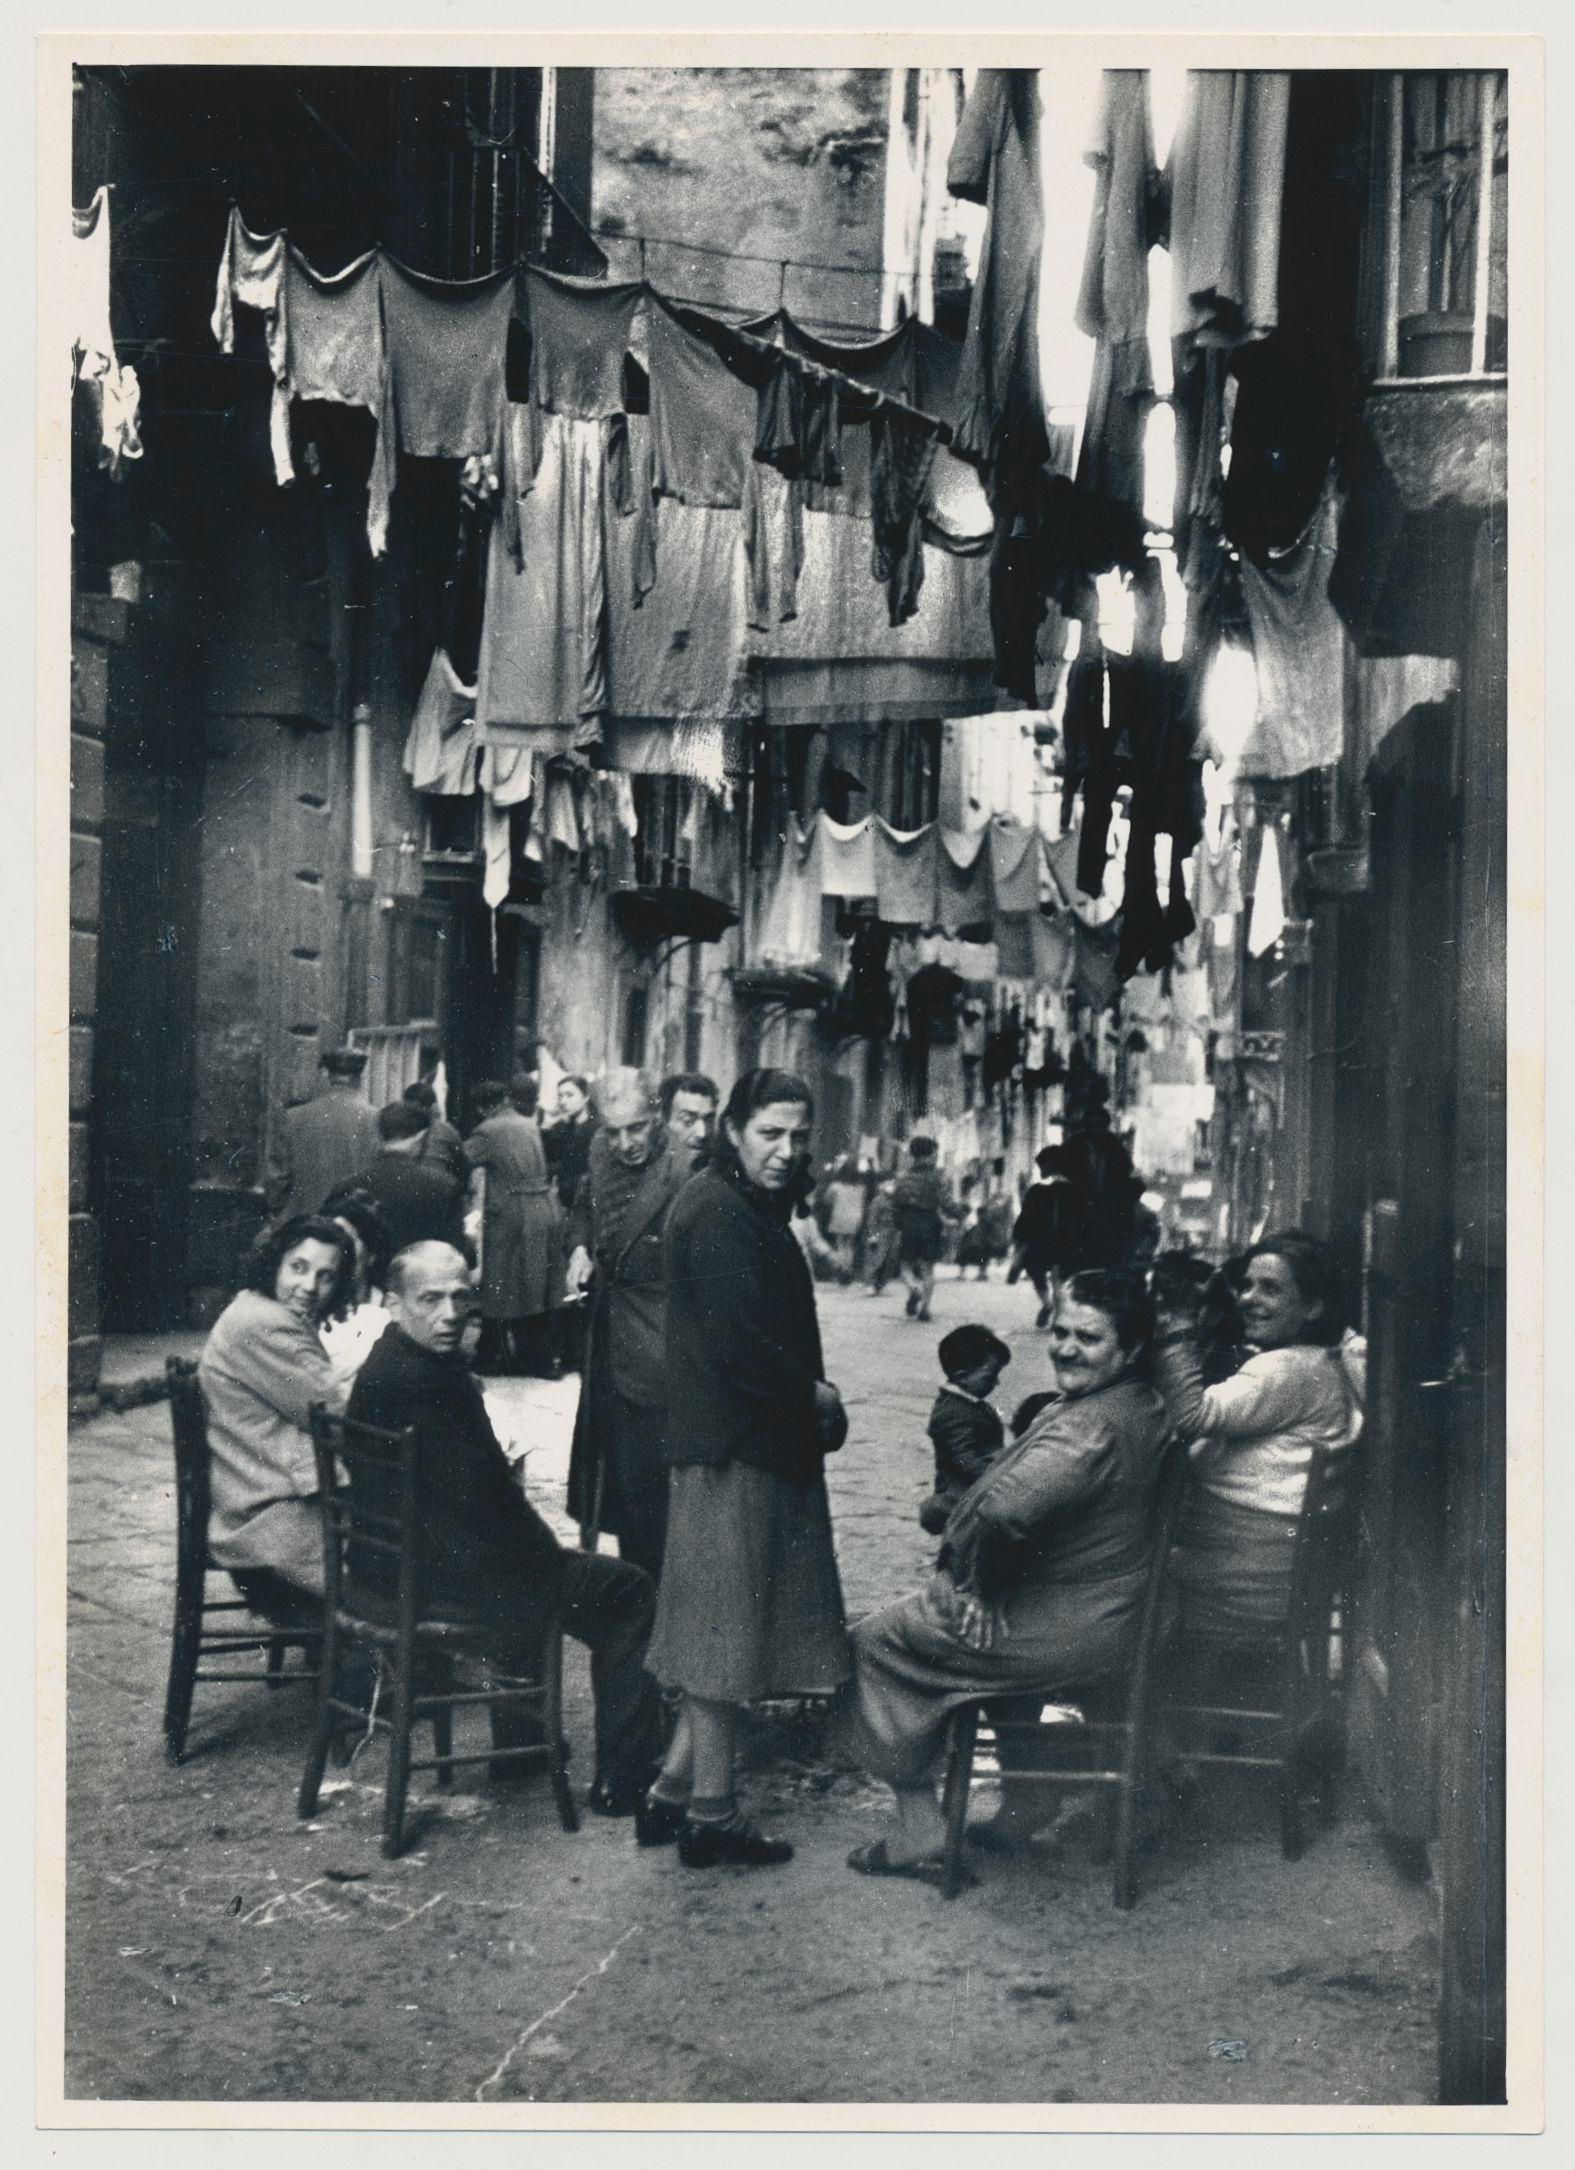 Erich Andres Black and White Photograph - Naples - People sitting on the streets, Italy 1950s